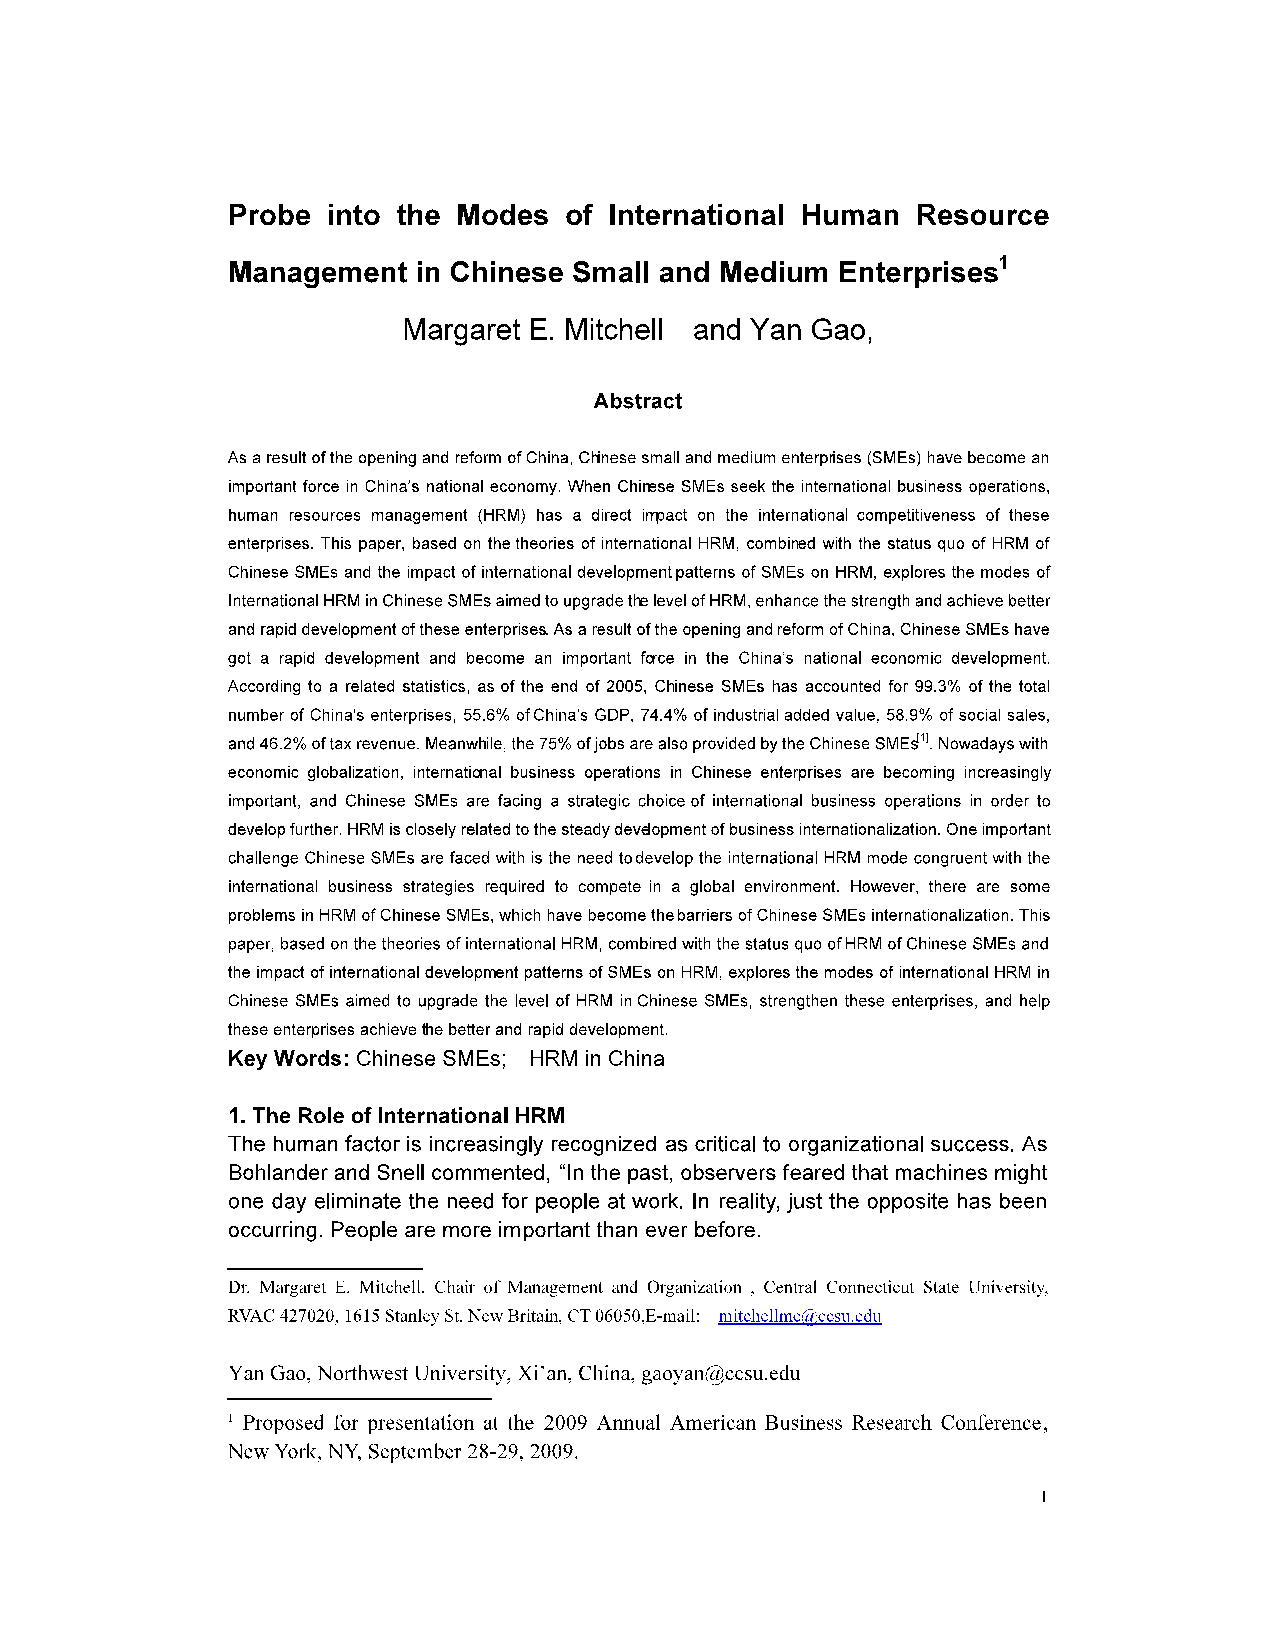 Probe into the Modes of International Human Resource12